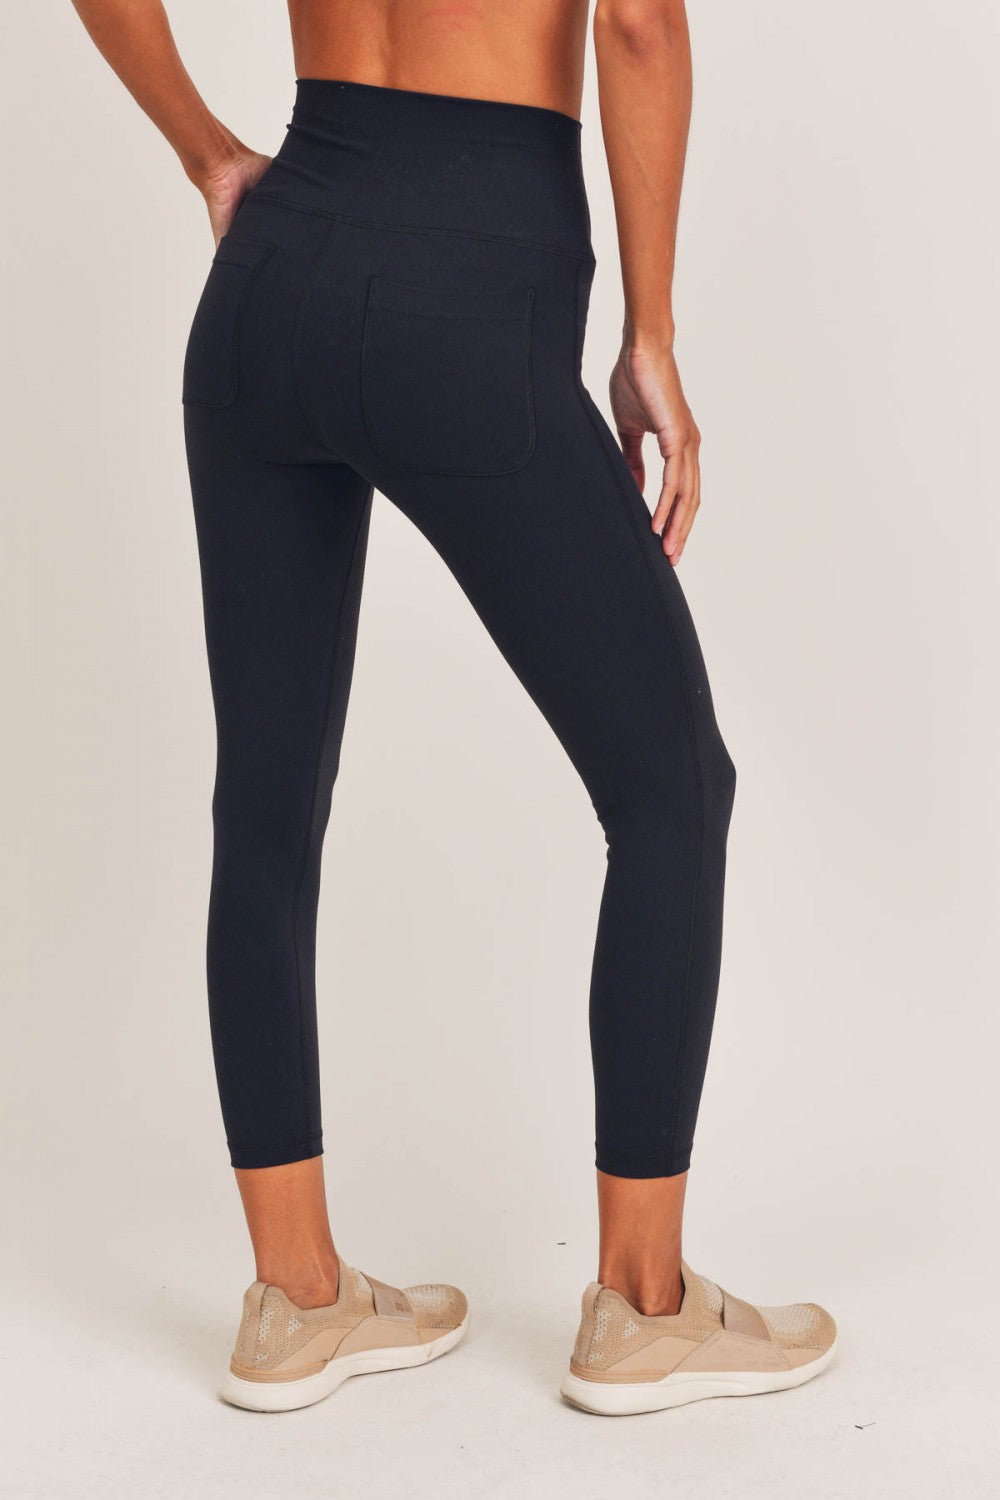 Tapered Band Solid Leggings with Back Pockets - BP606